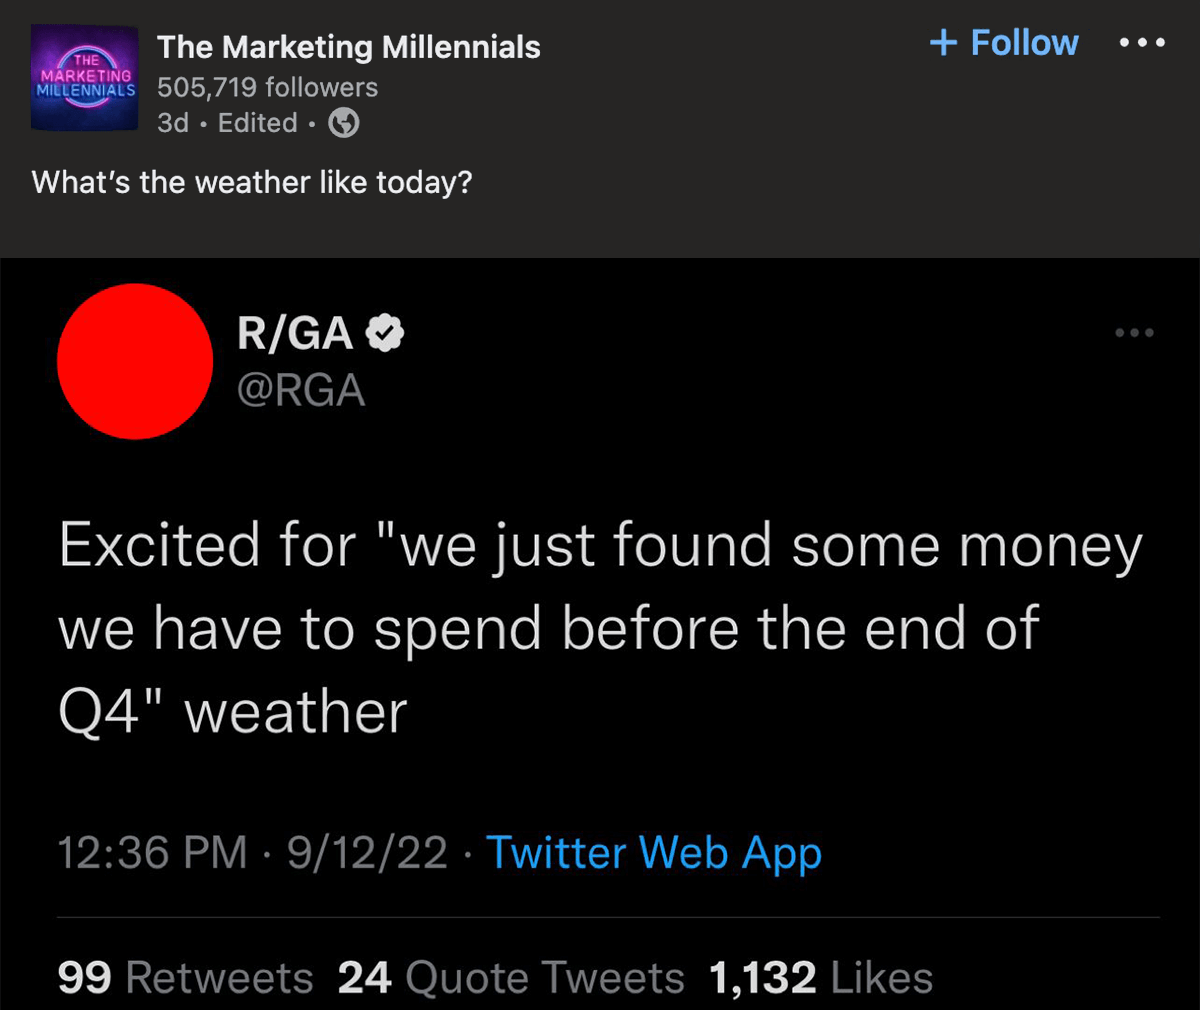 The Marketing Millennials on LinkedIn: What's the weather like today? Image of tweet reading Excited for we just found some money we have to spend before the end of Q4 weather.